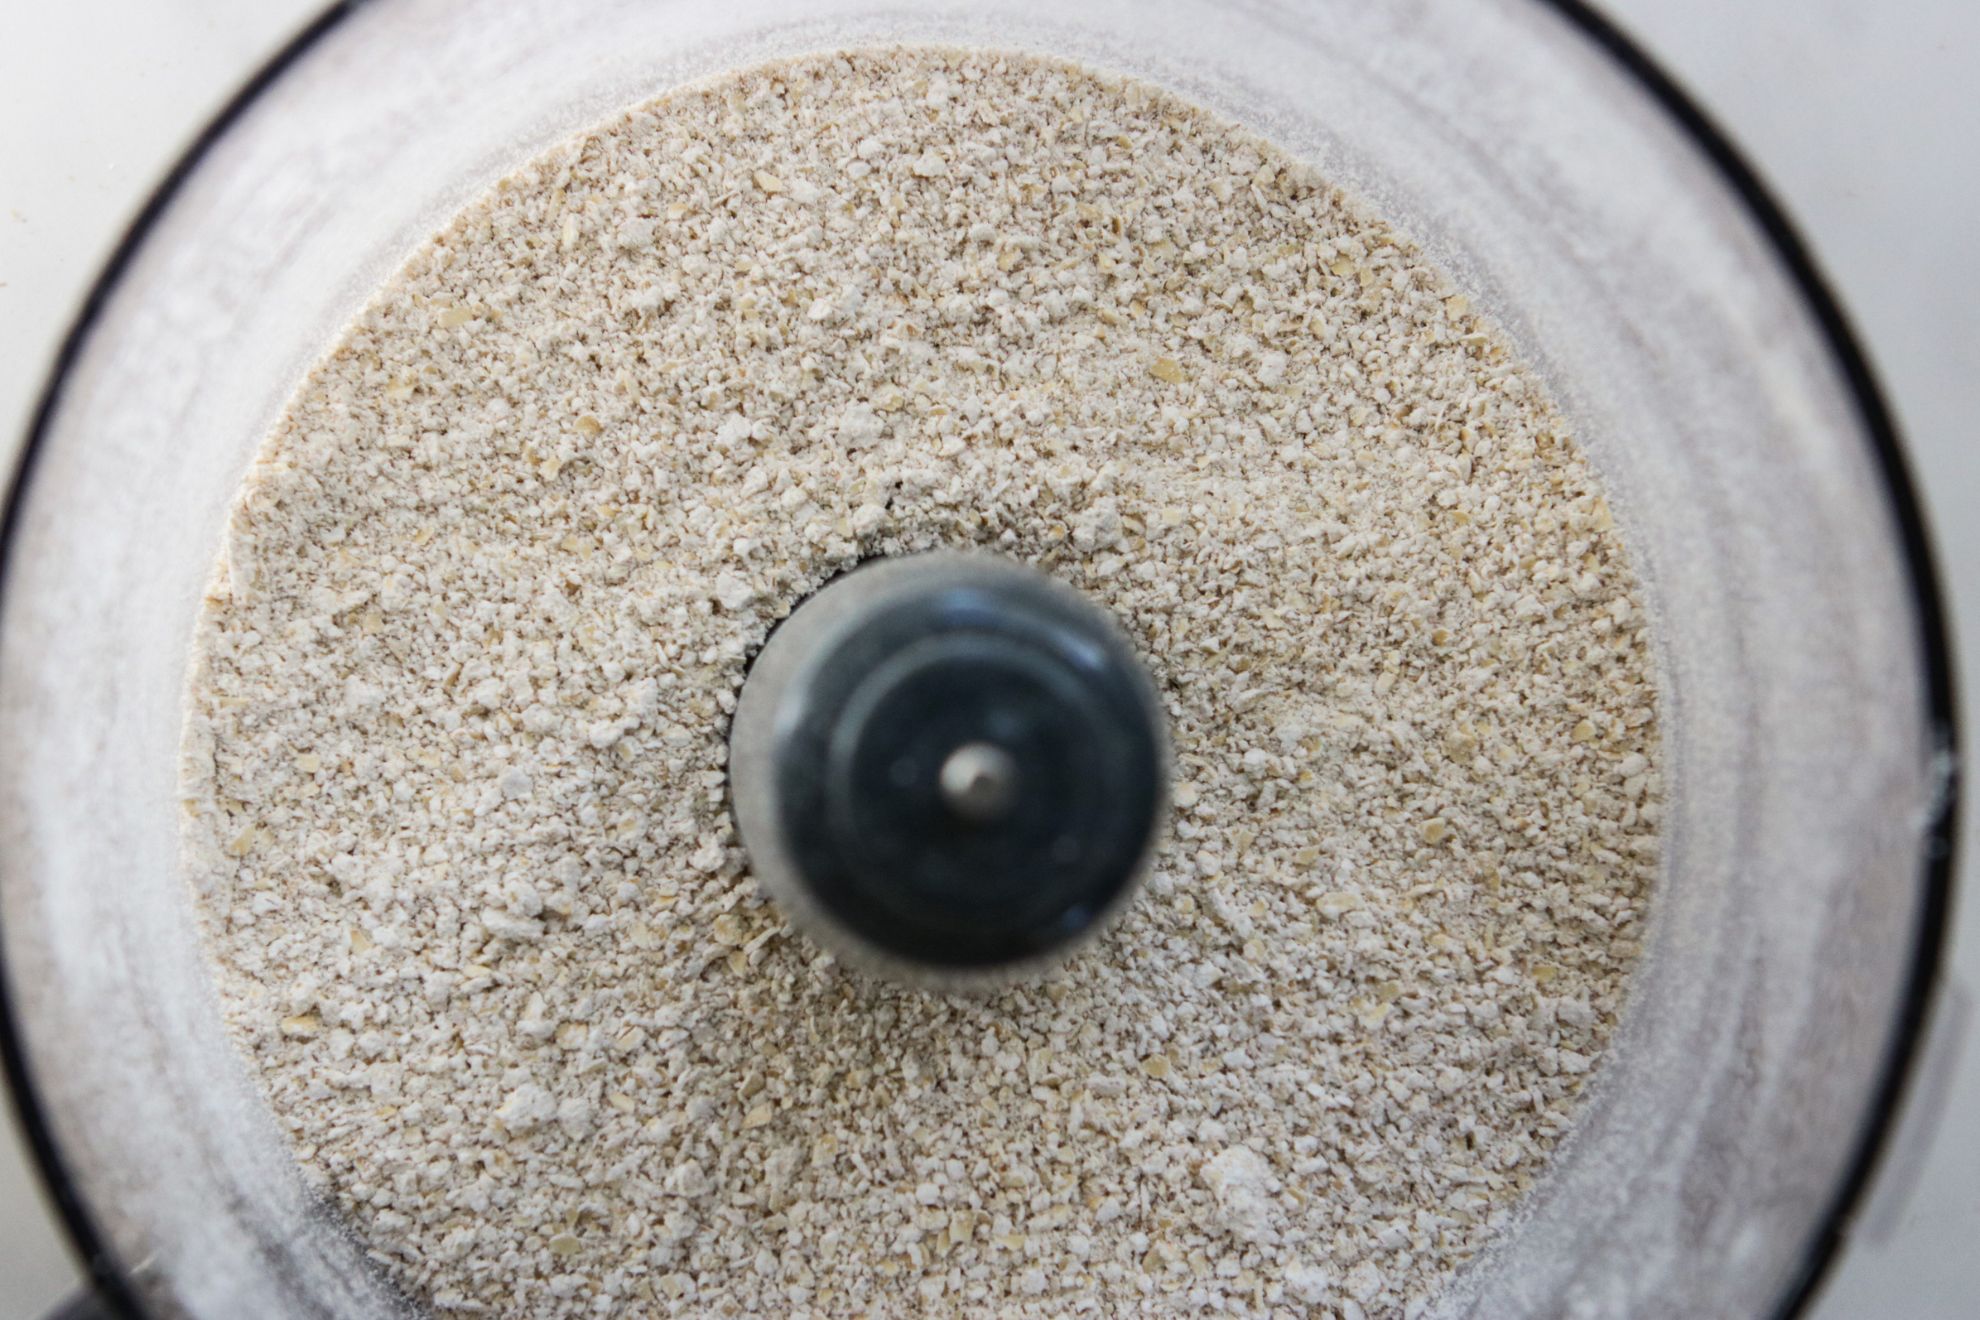 This is an overhead image looking down into a food processor. There is ground up oats in the food processor.